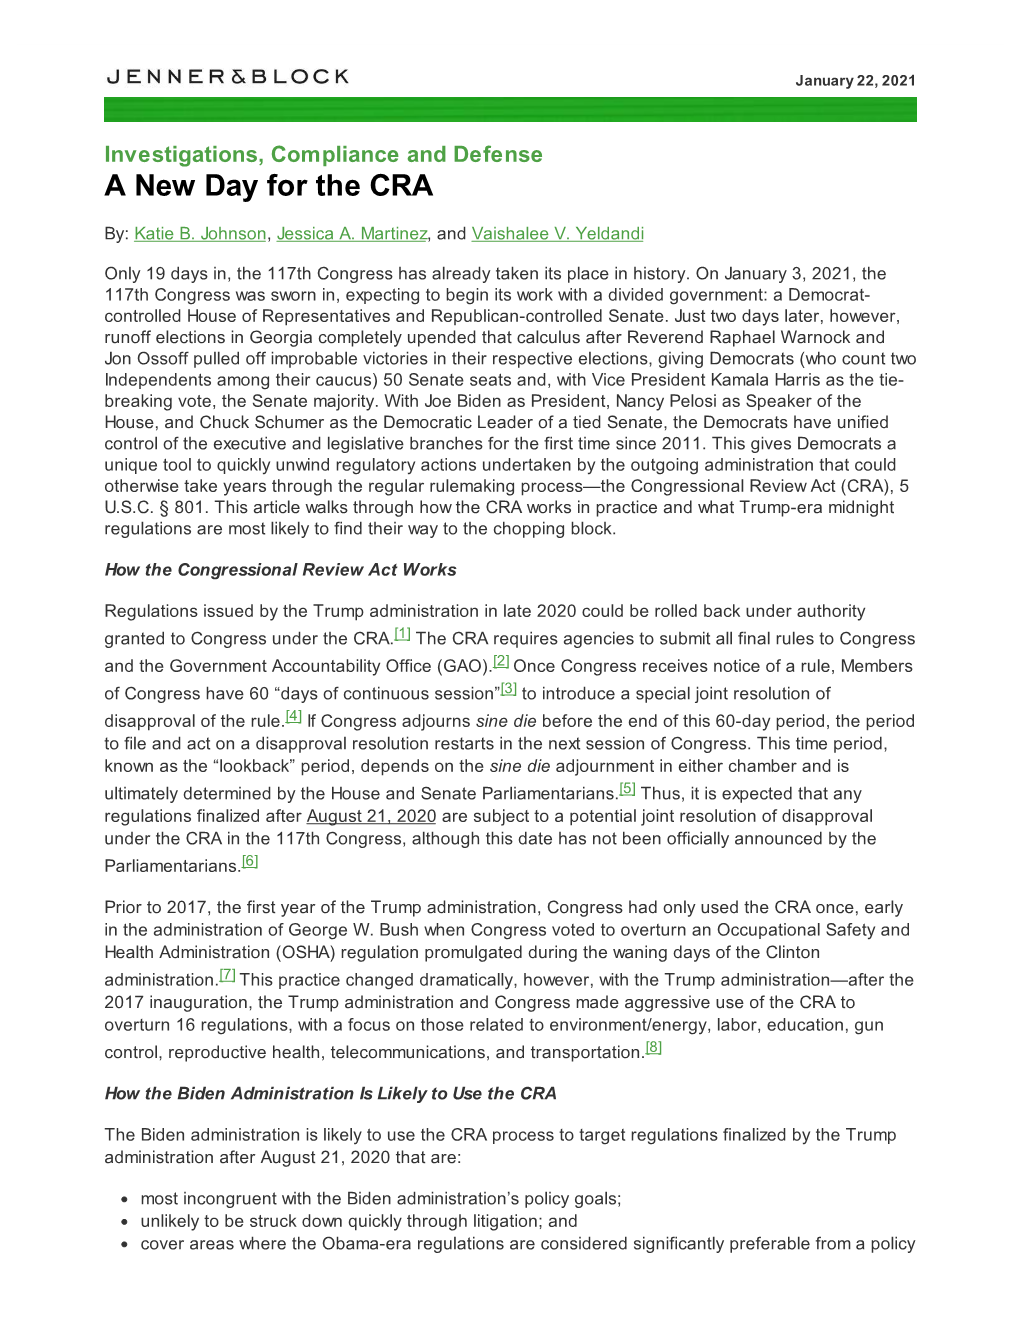 A New Day for the CRA